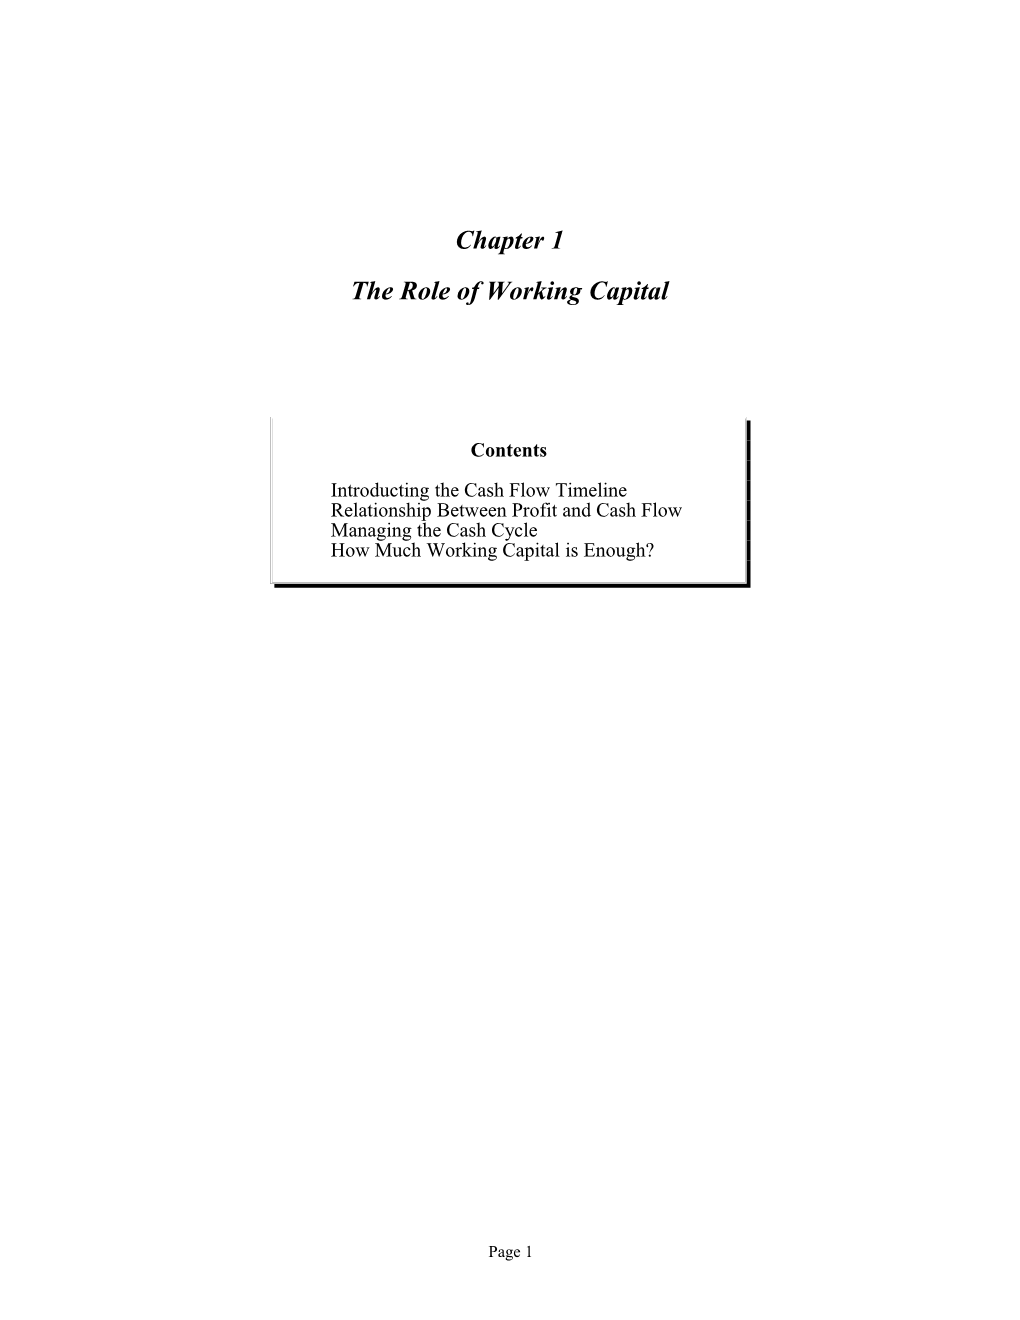 The Role of Working Capital